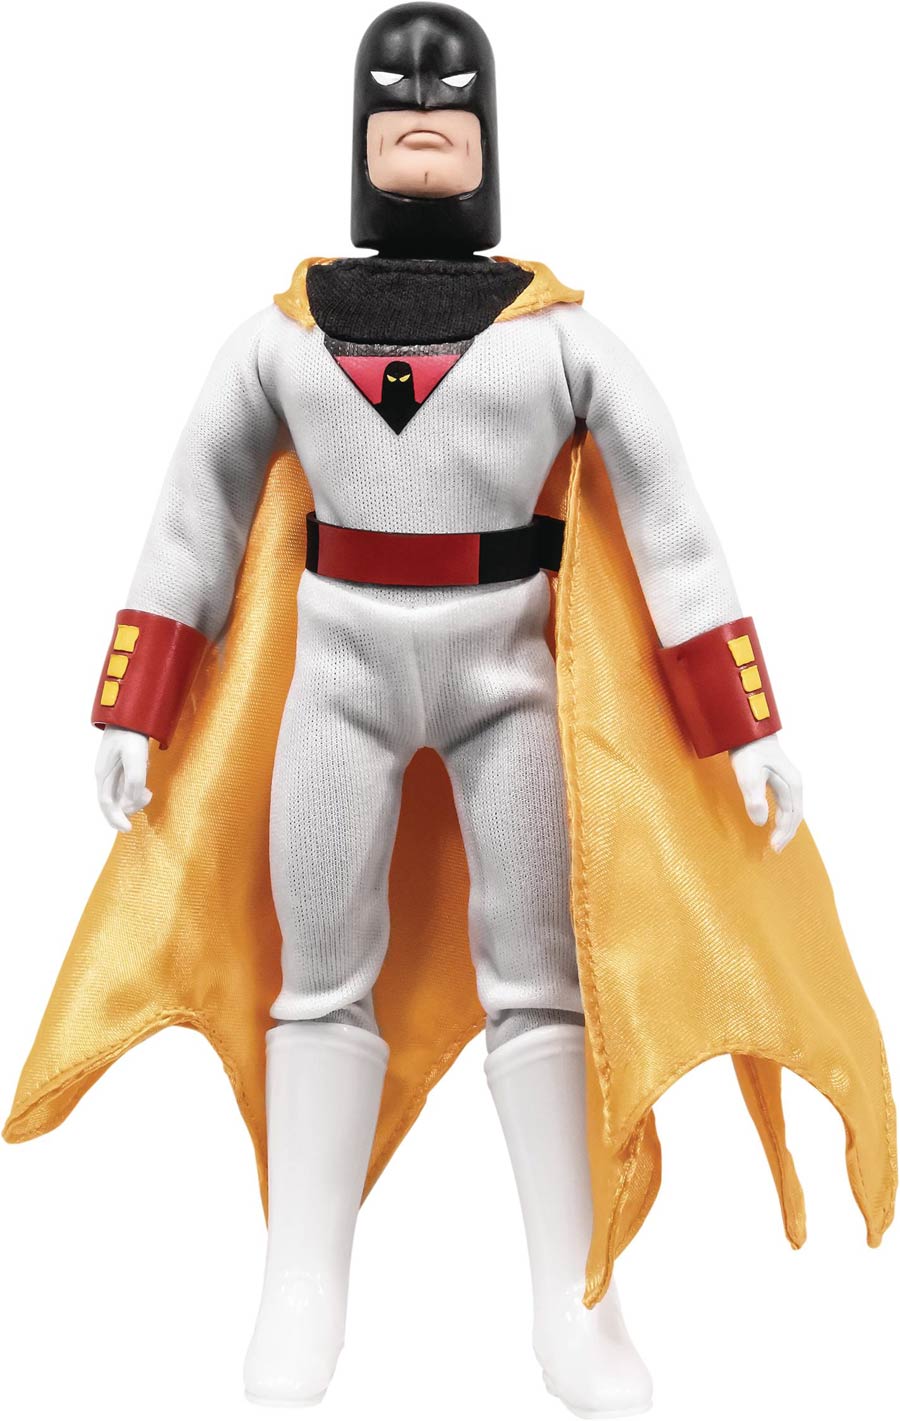 Hanna-Barbera Space Ghost Space Ghost 8-Inch Action Figure Case